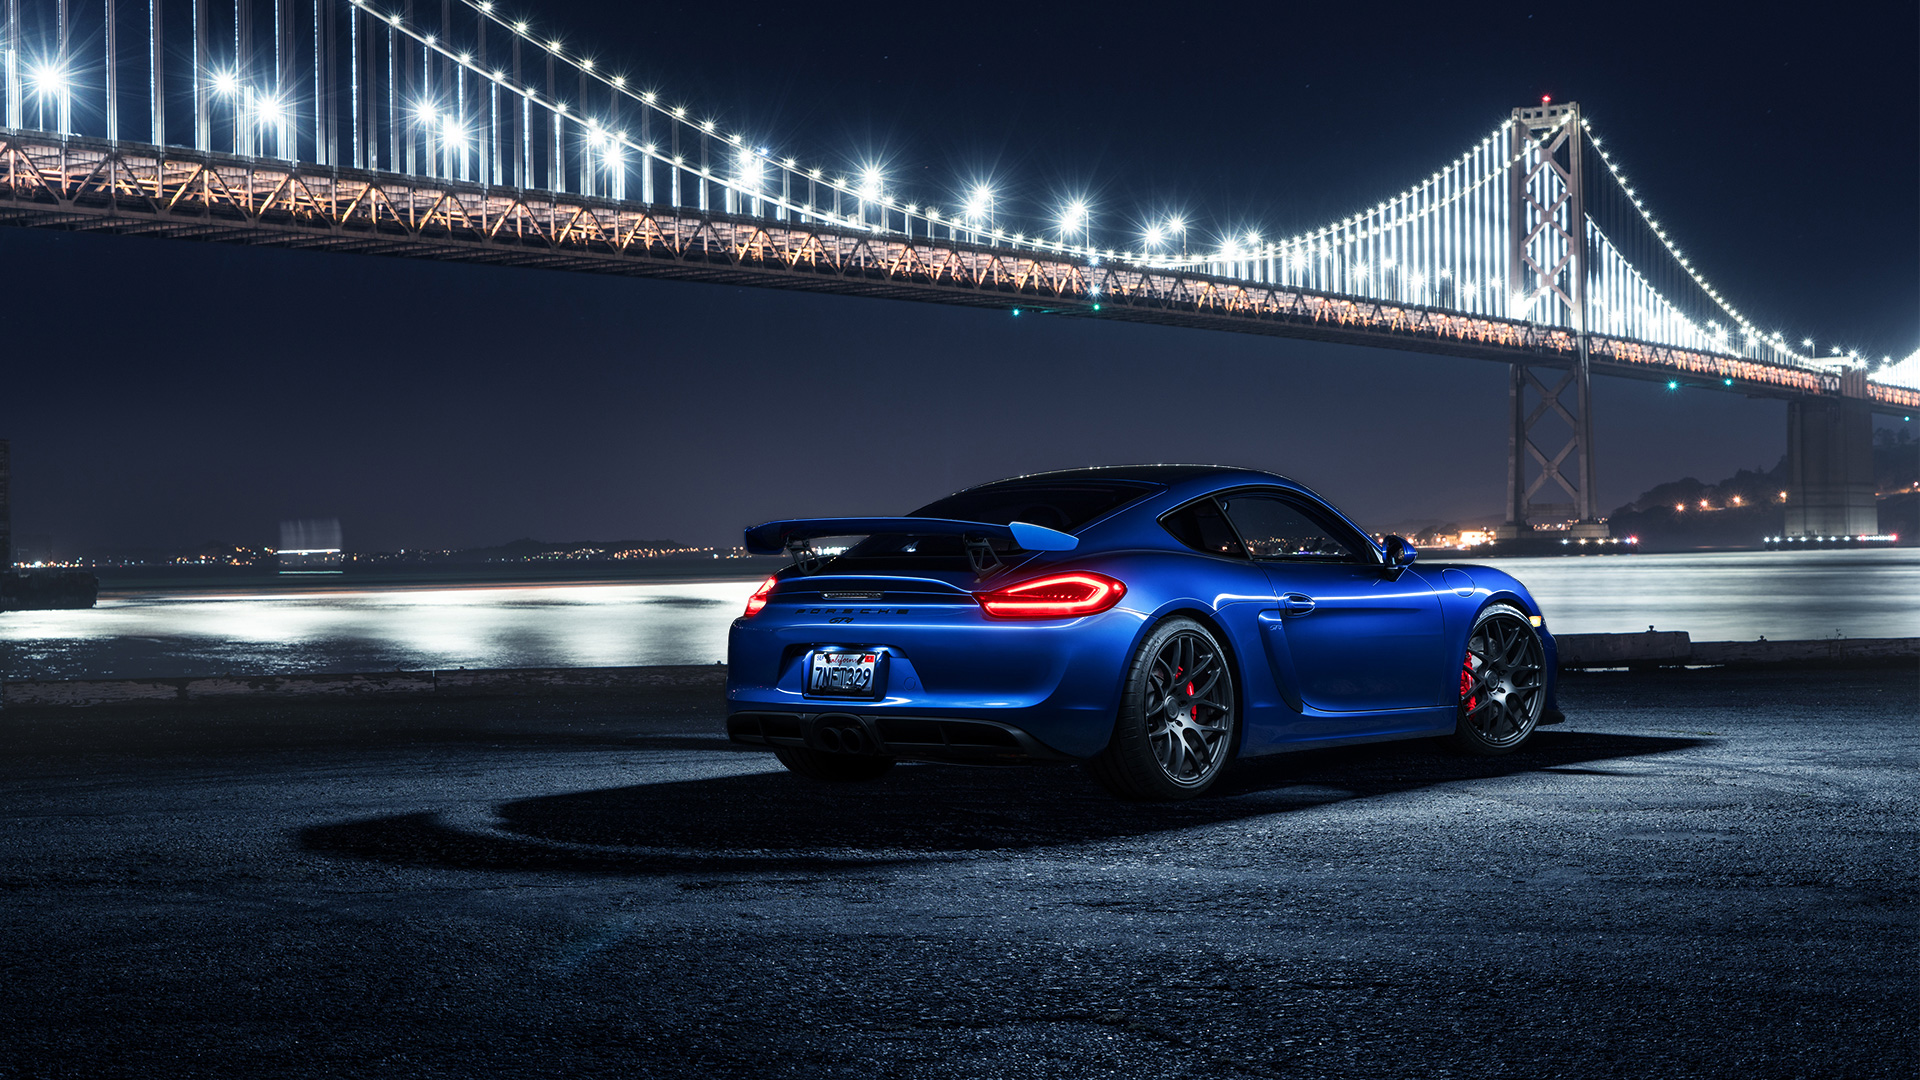 Porsche Cayman GT4 Wallpapers and Background Images   stmednet